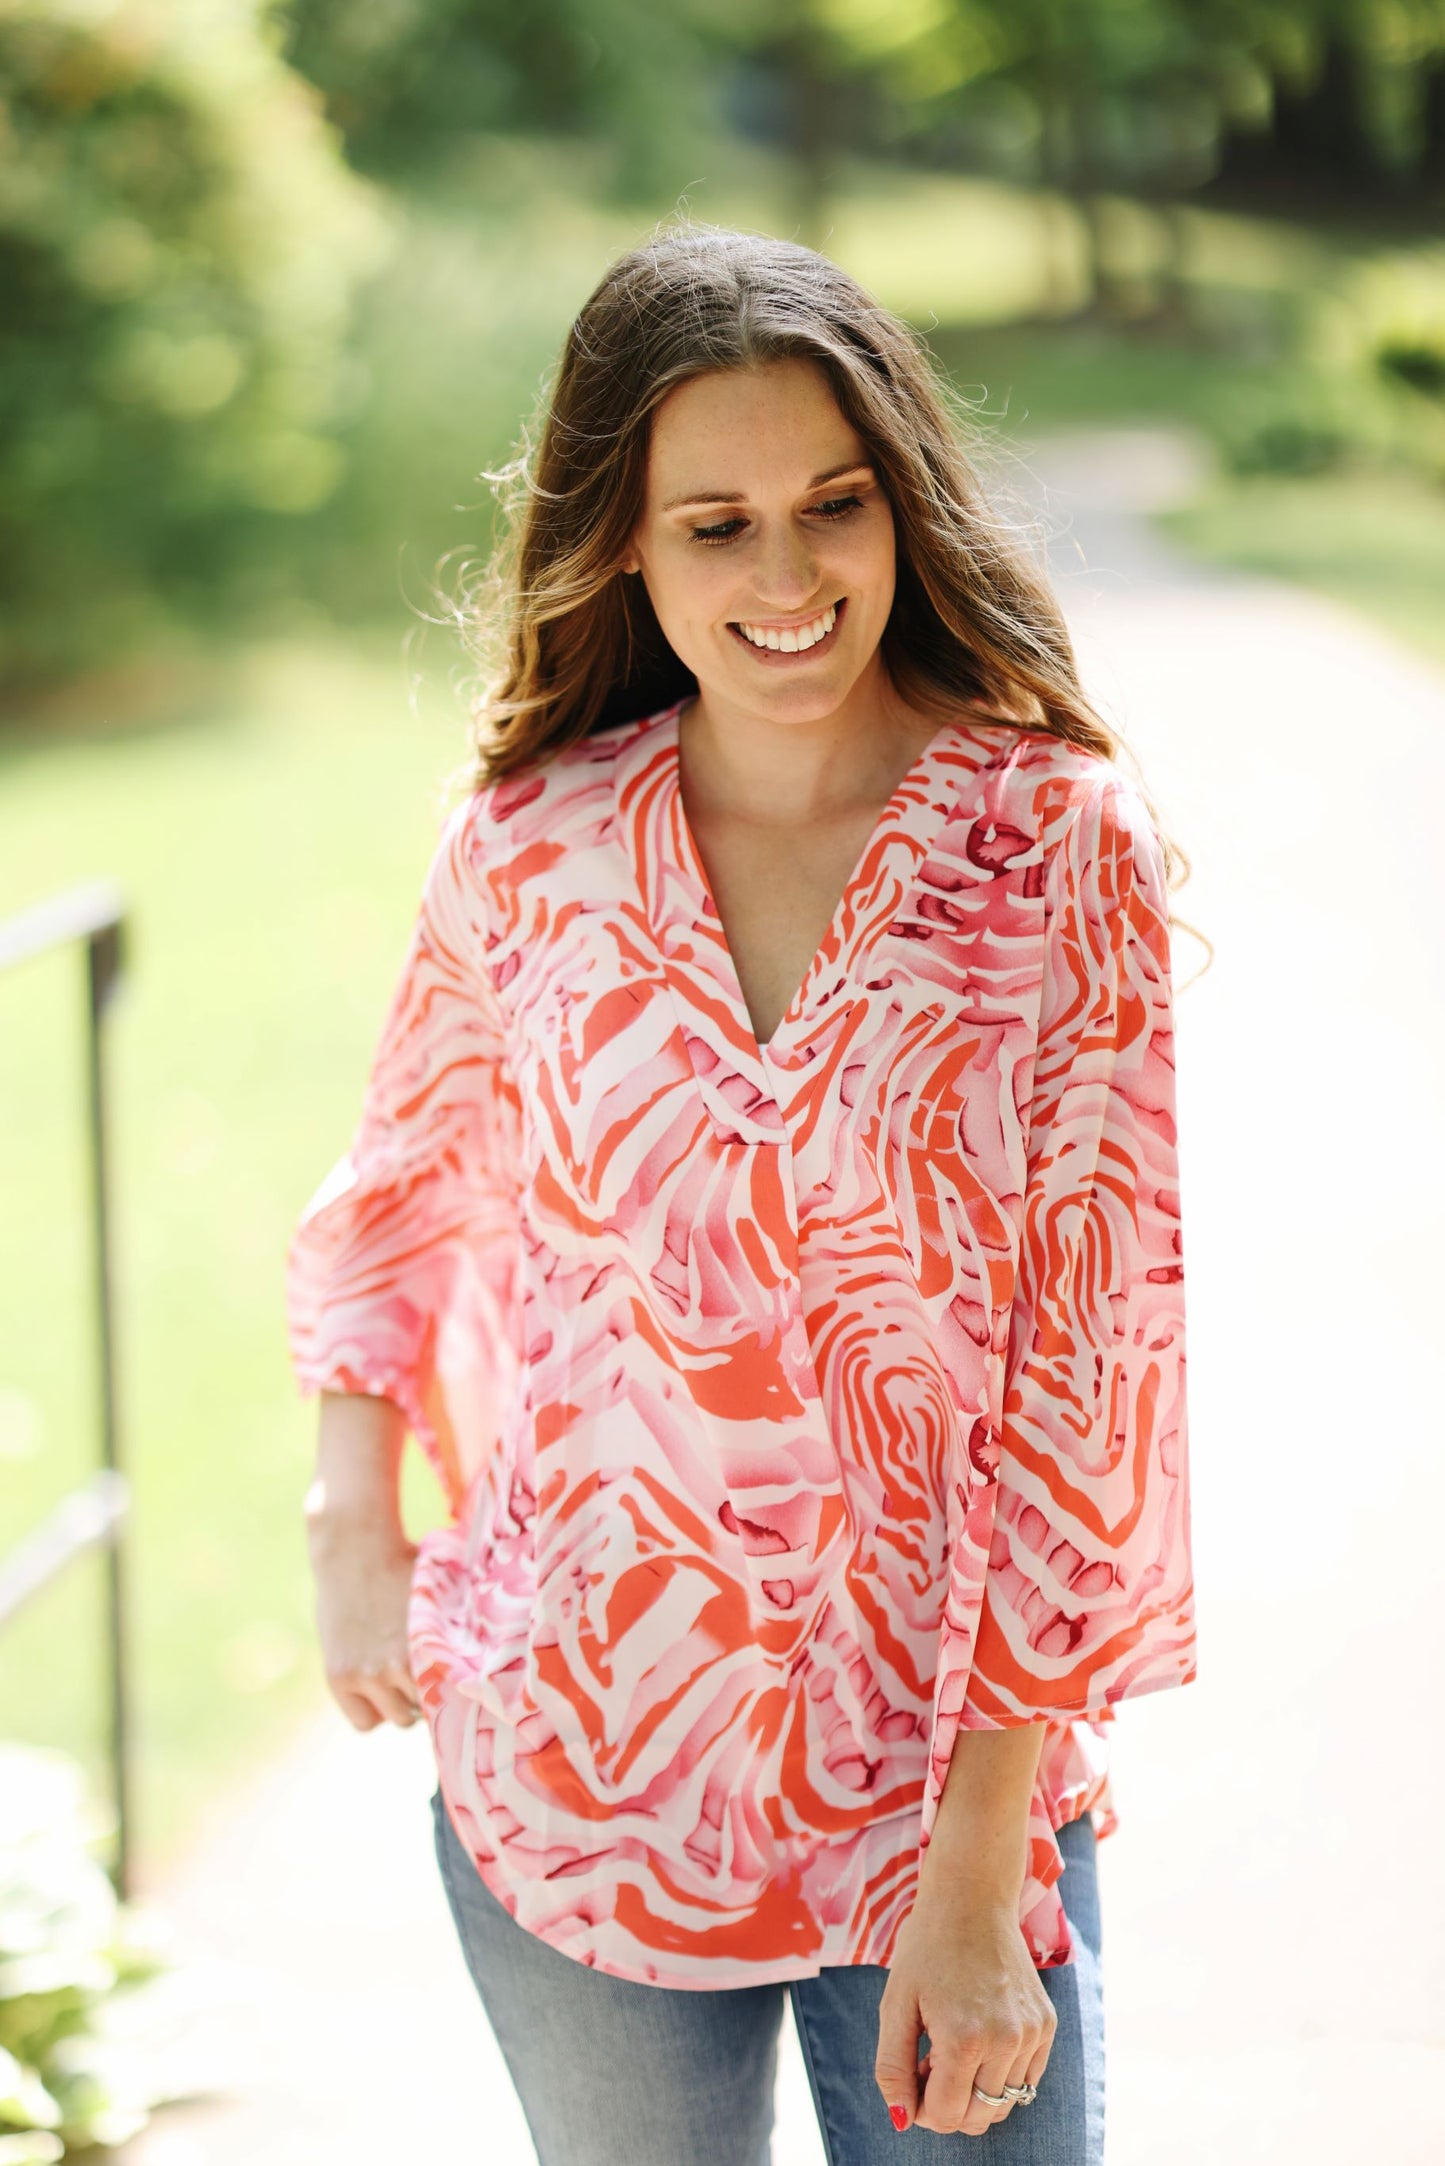 Swirling into Style Blouse